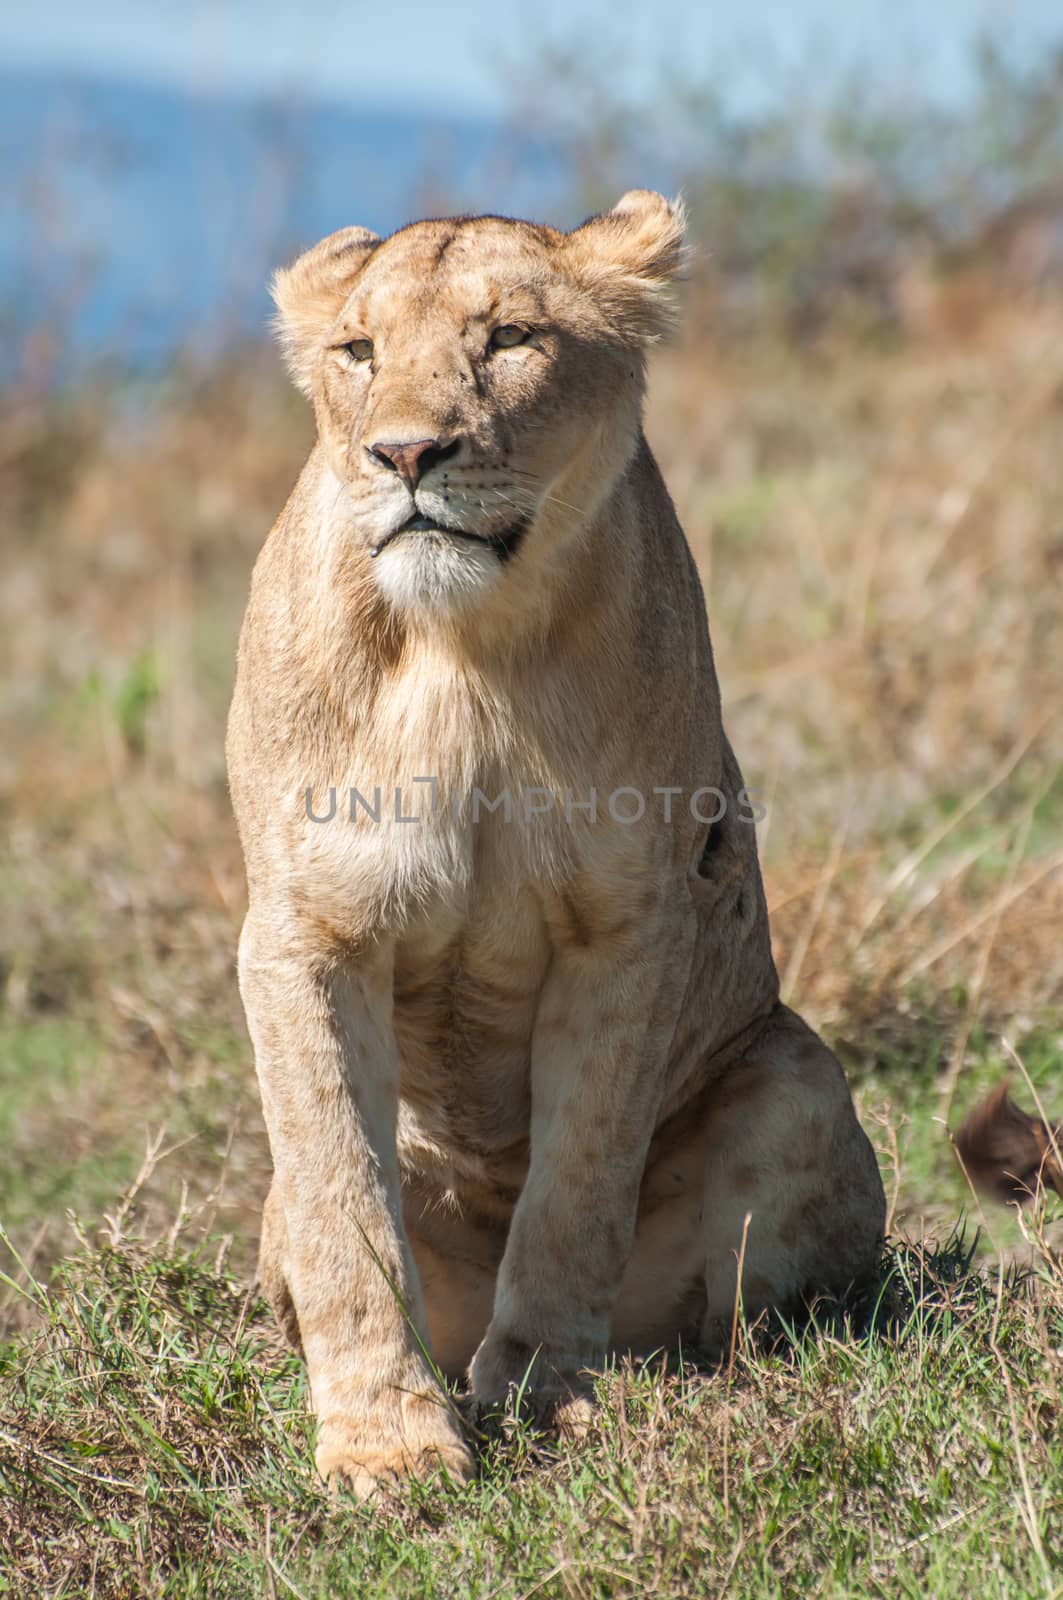 Lioness sitting up straight in the grassland of the Ngorongoro Crater while staring tentatively.